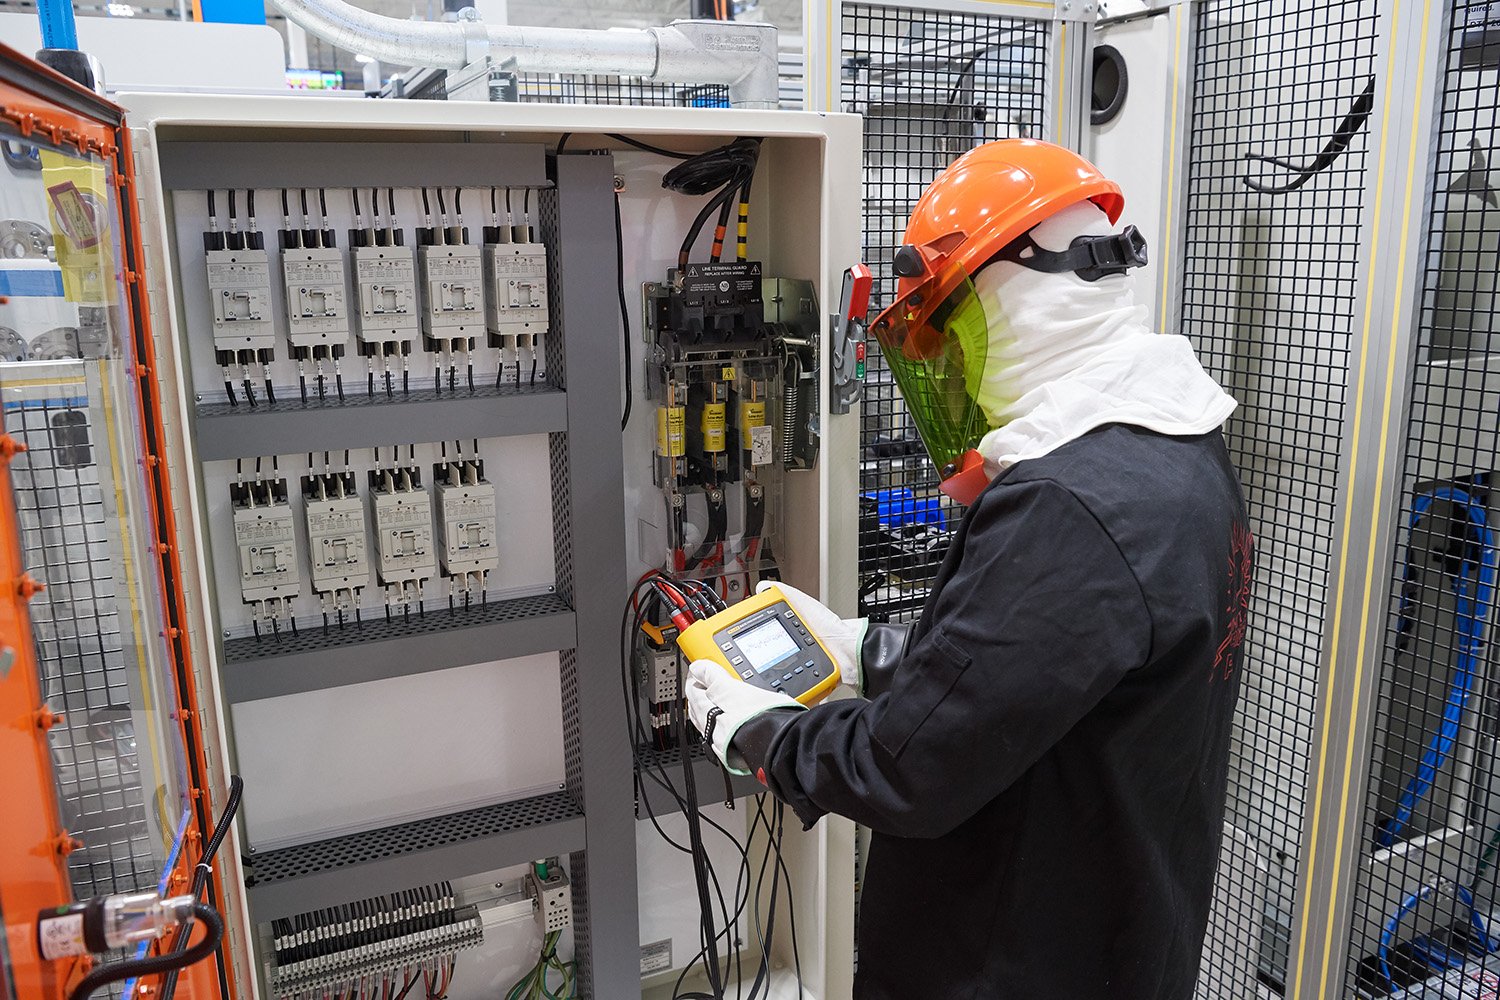 Dana technician sets up a power monitor within an electrical panel.